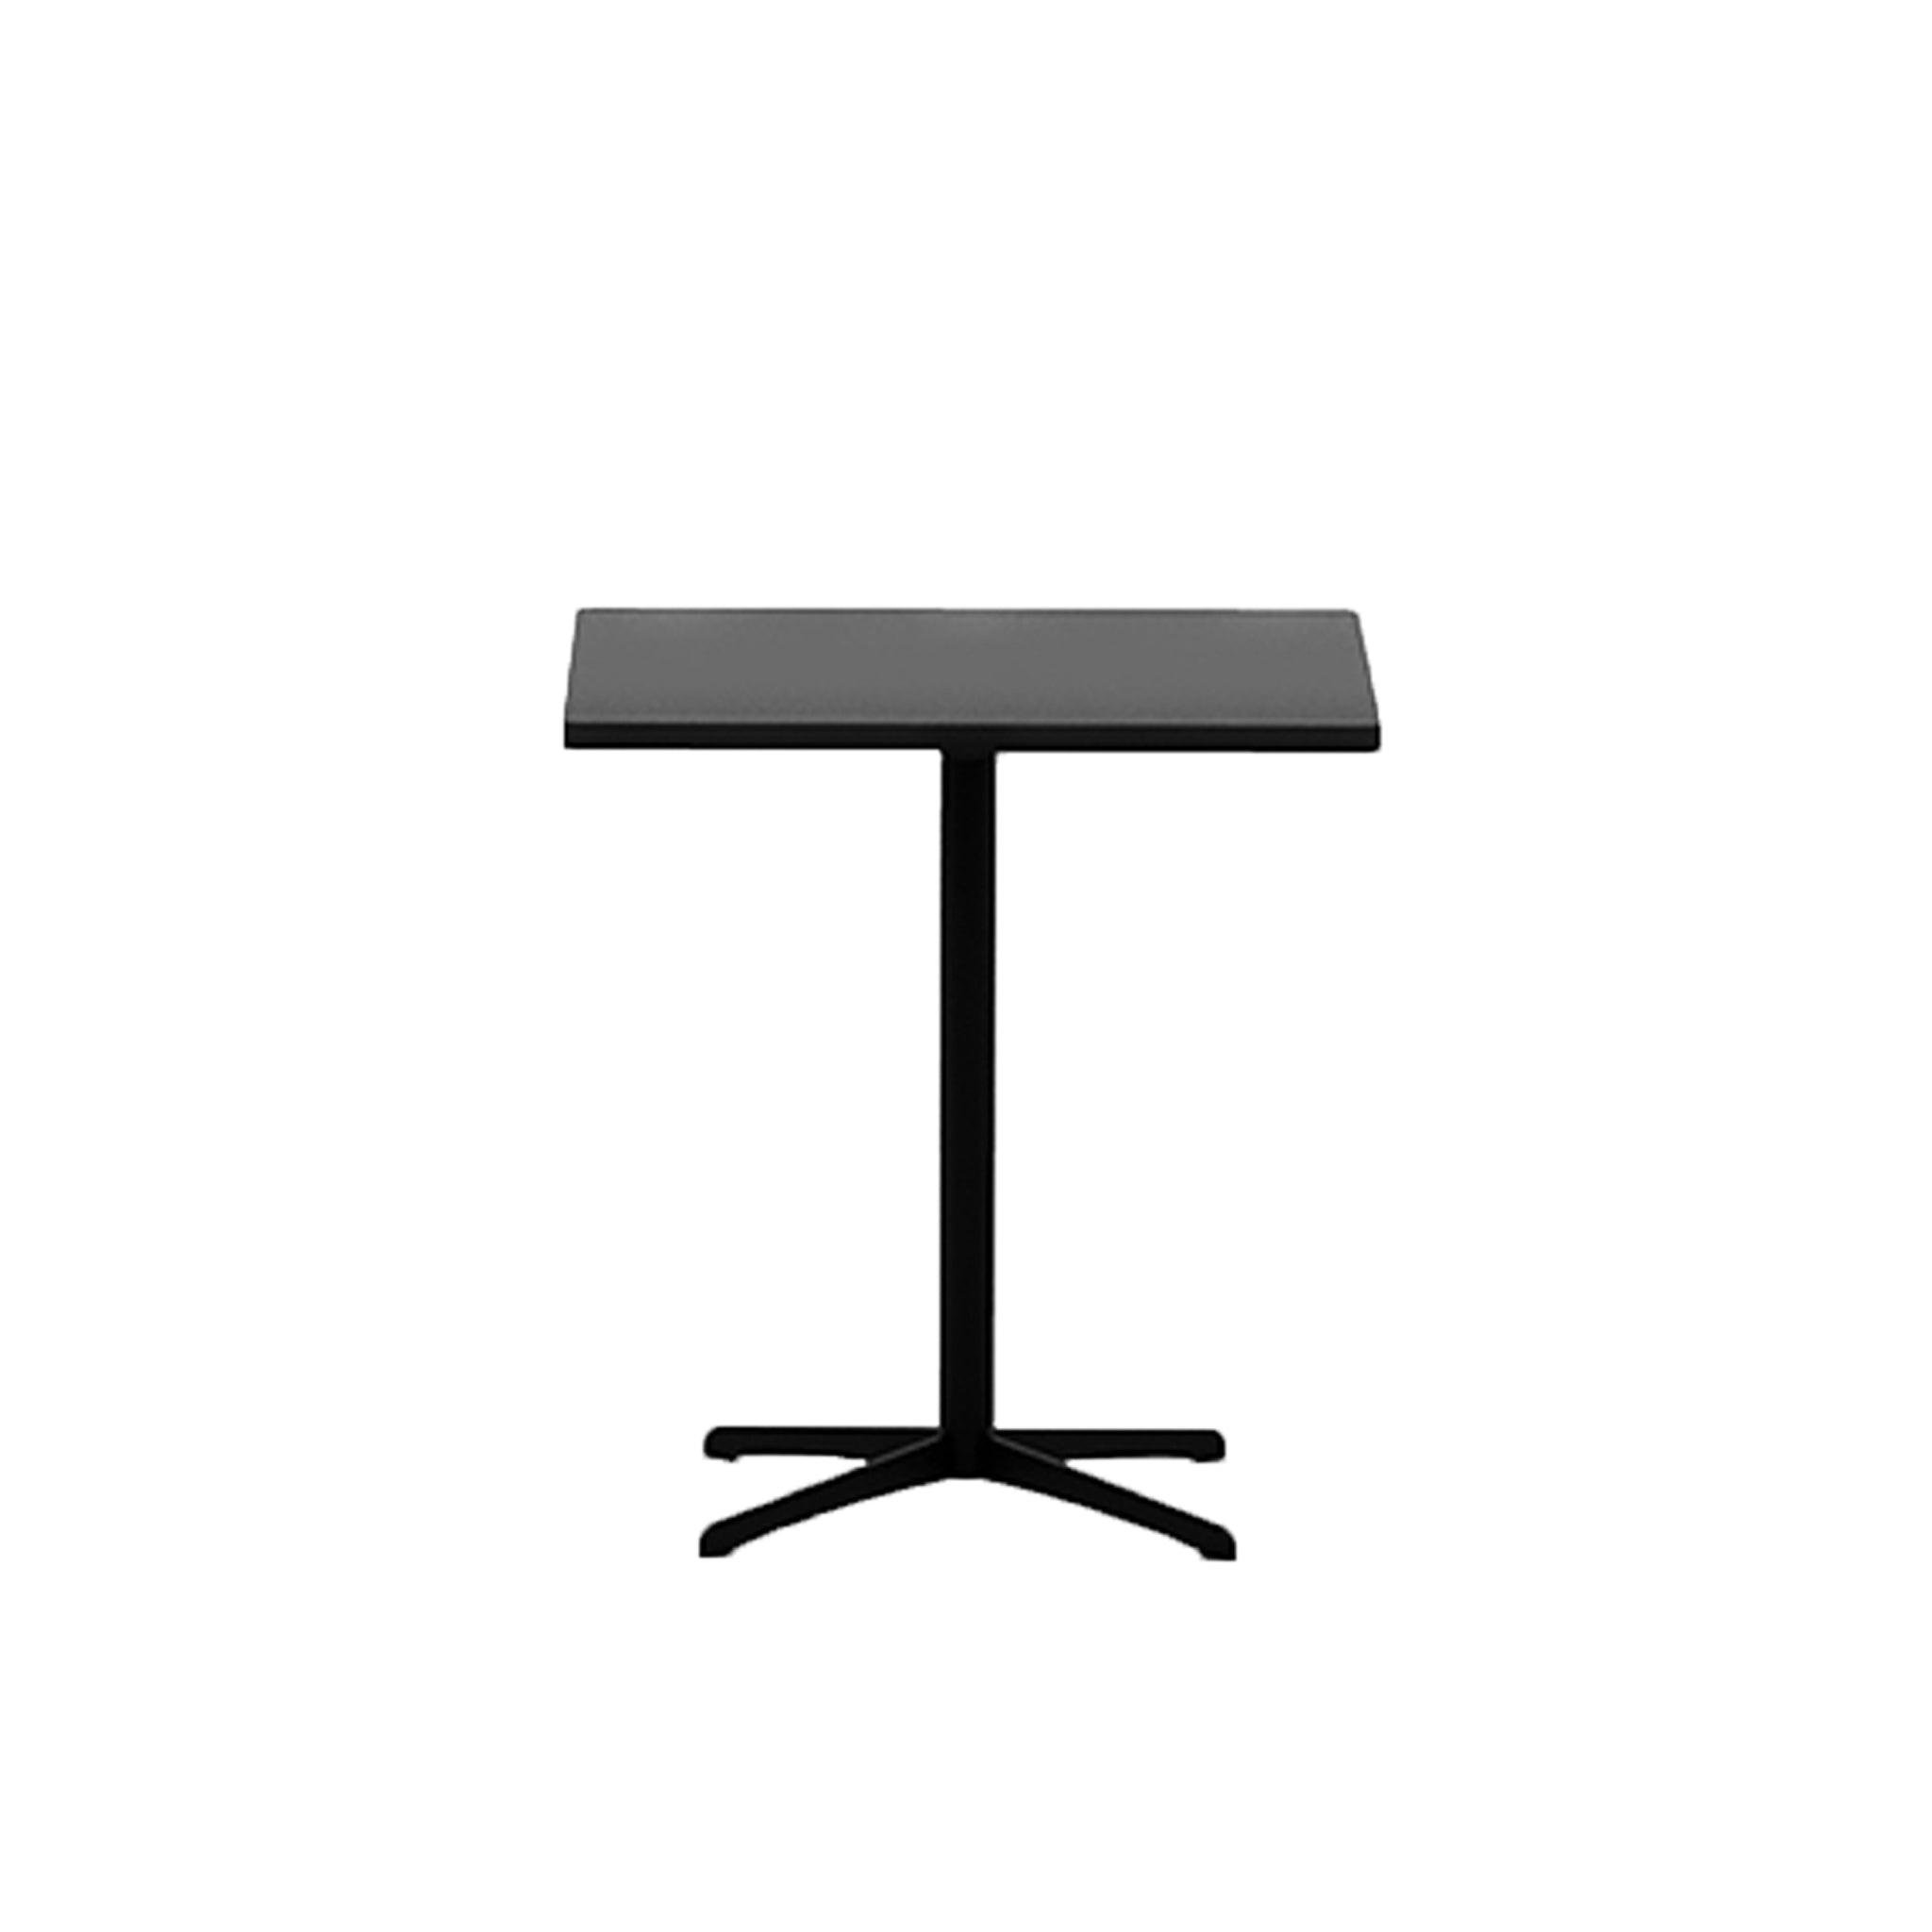 Dina - Square Dining Table 700/800/900mm